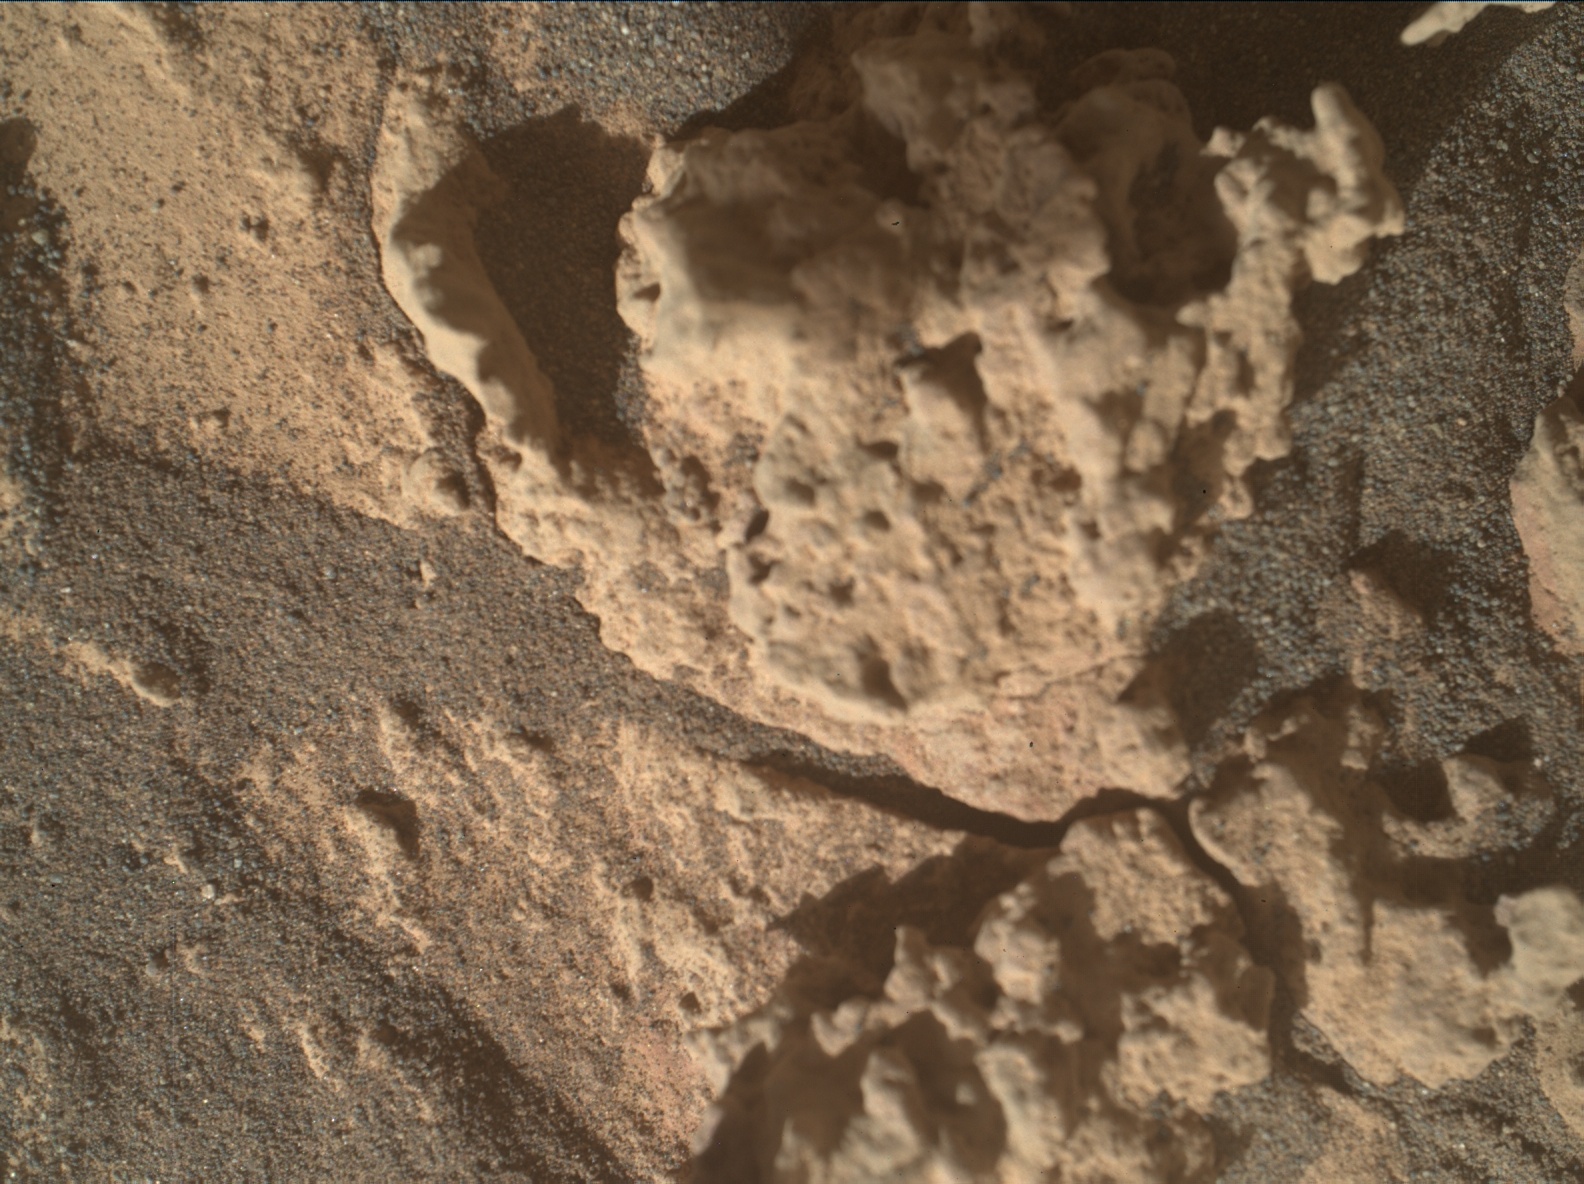 Nasa's Mars rover Curiosity acquired this image using its Mars Hand Lens Imager (MAHLI) on Sol 3180